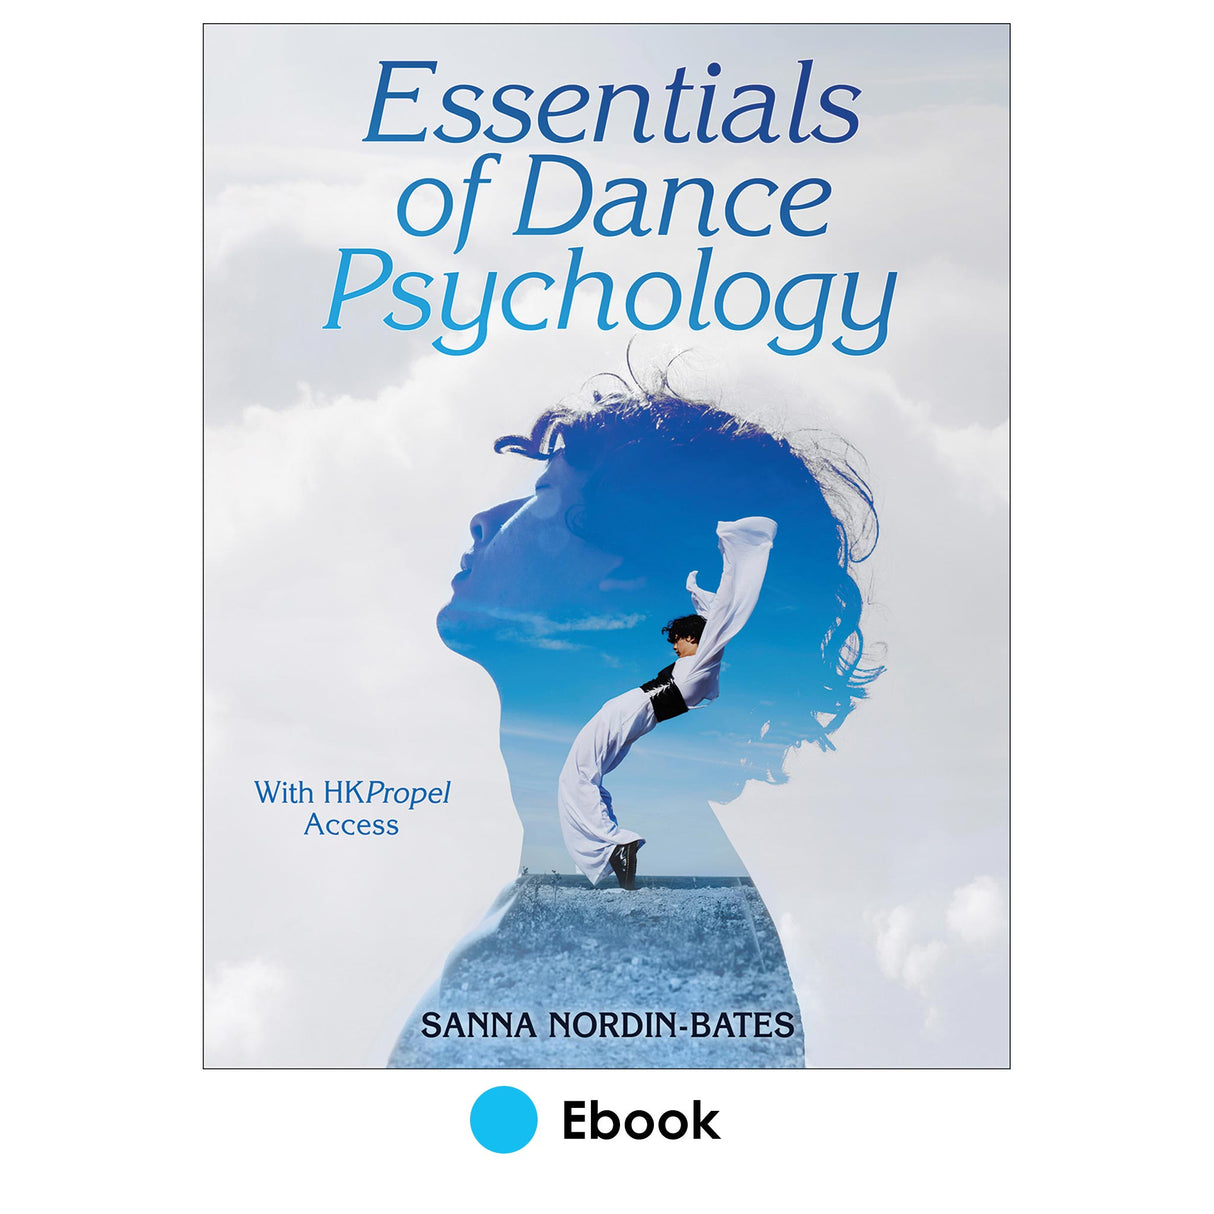 Essentials of Dance Psychology Ebook With HKPropel Access